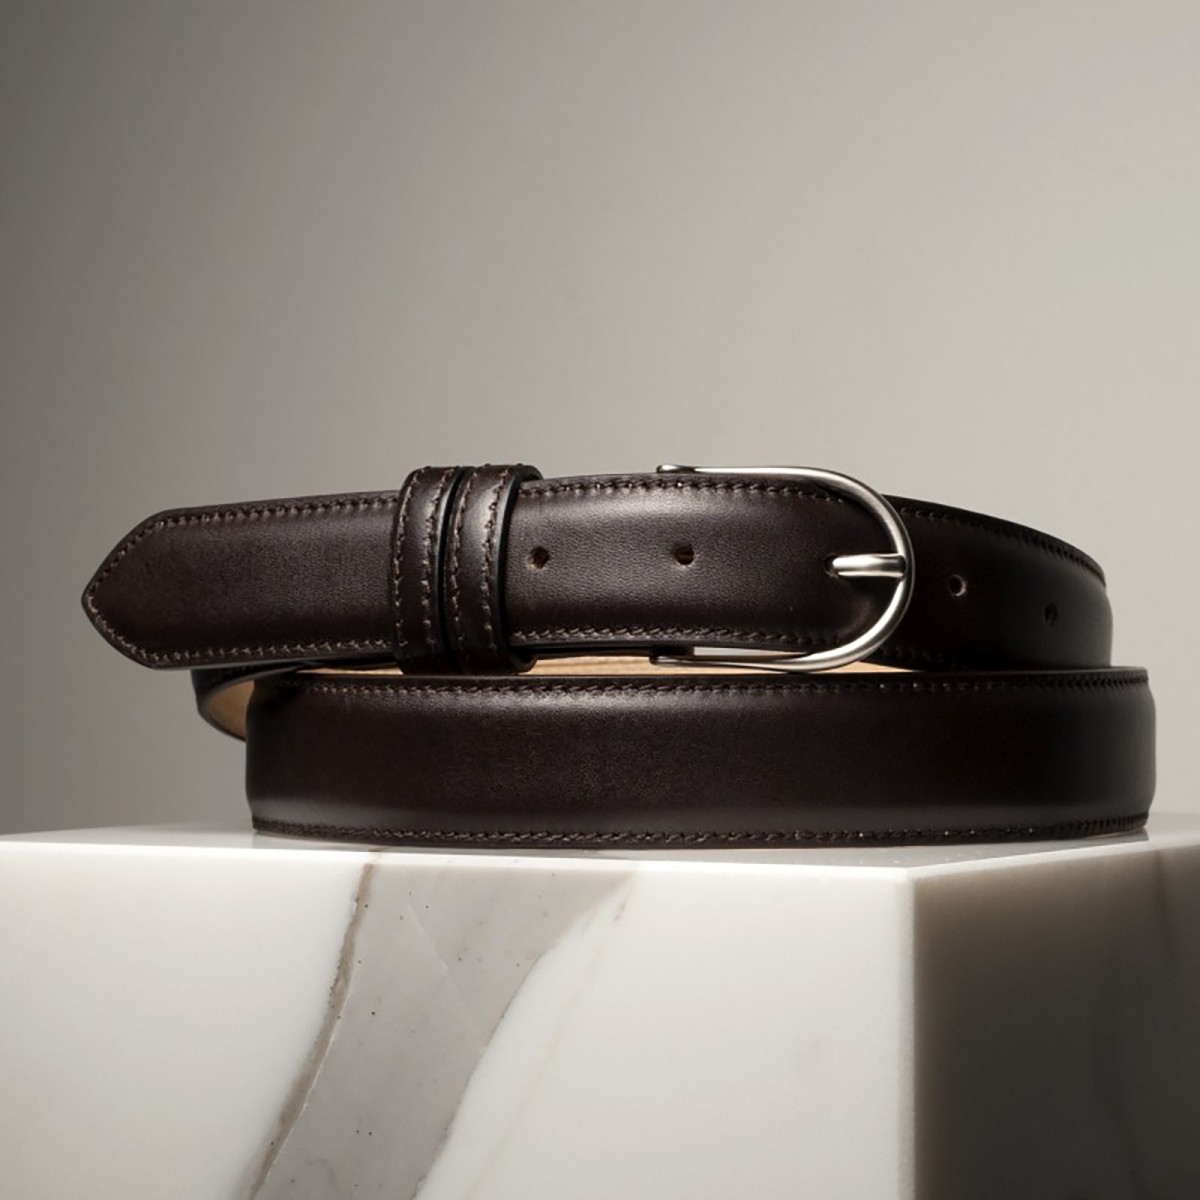 FRENCH CALFSKIN - Leather belt, handmade in Italy